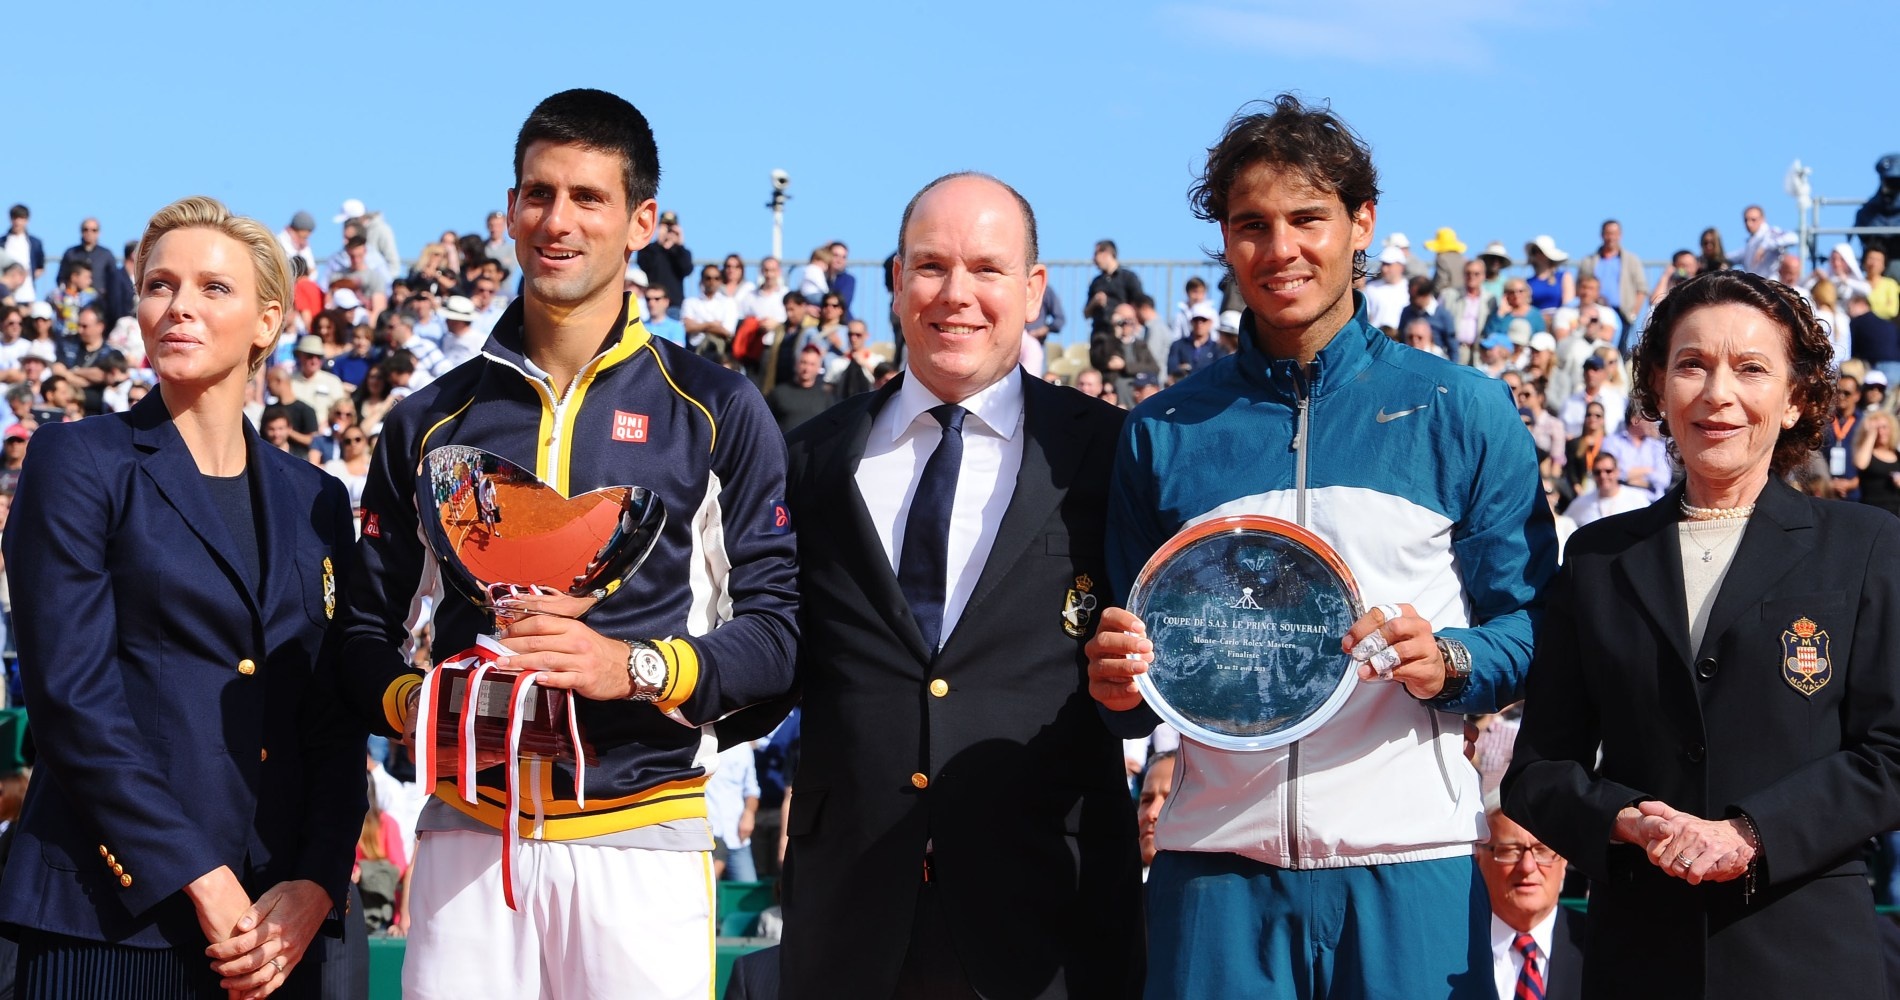 Novak Djokovic and Rafael Nadal pose with their trophies after the 2013 final.